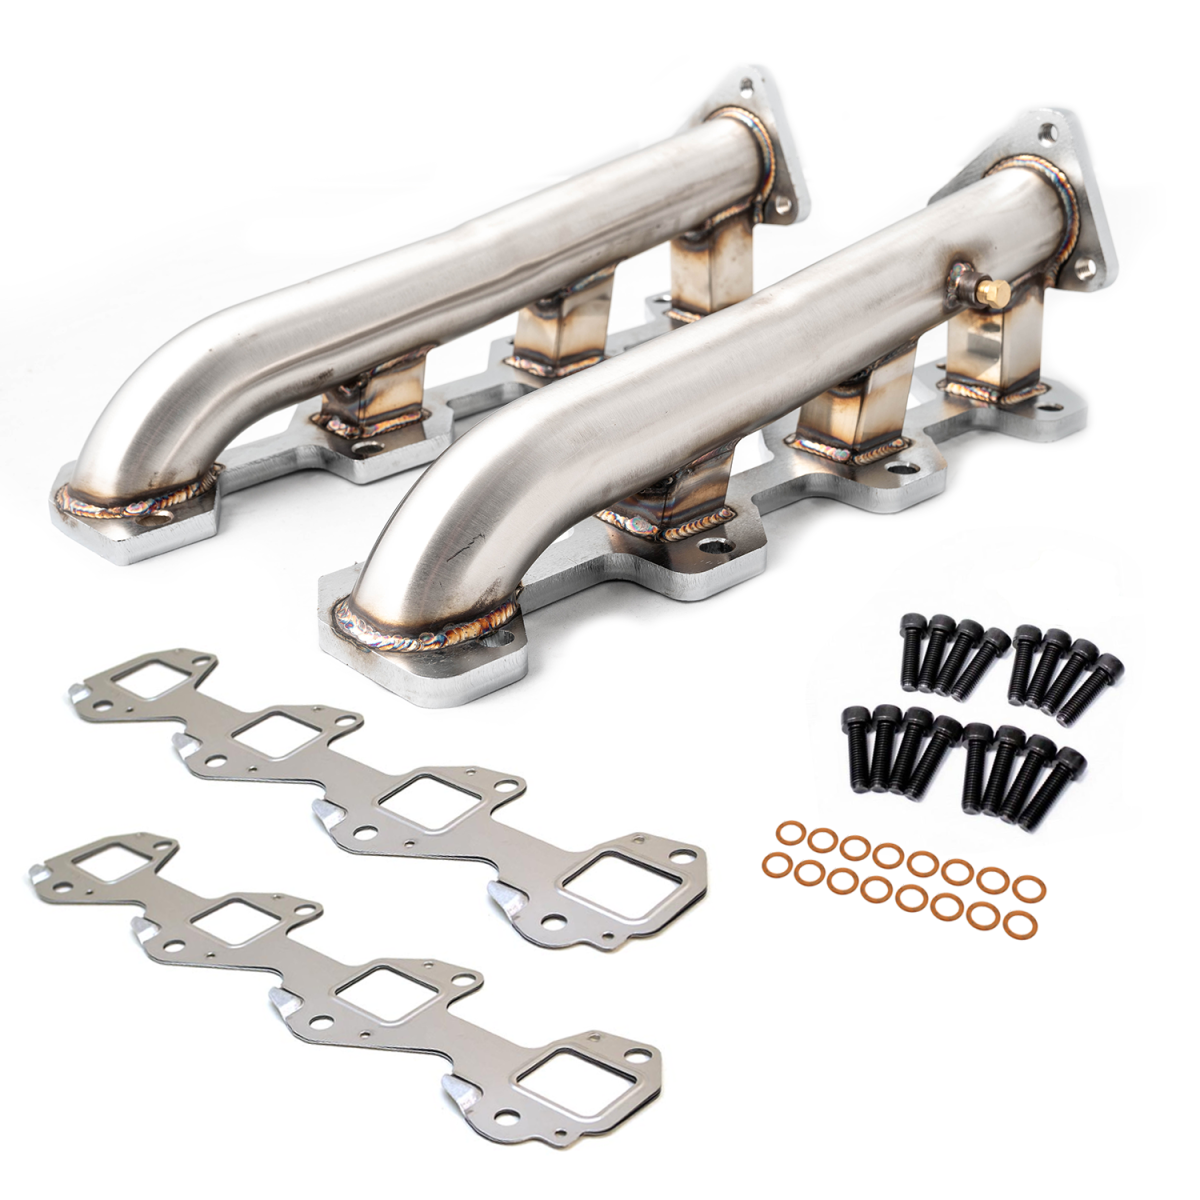 Rudy's Performance Parts - Rudy's High Flow Stainless Steel Exhaust Manifold Kit For 2001-2016 GM 6.6L Duramax Diesel